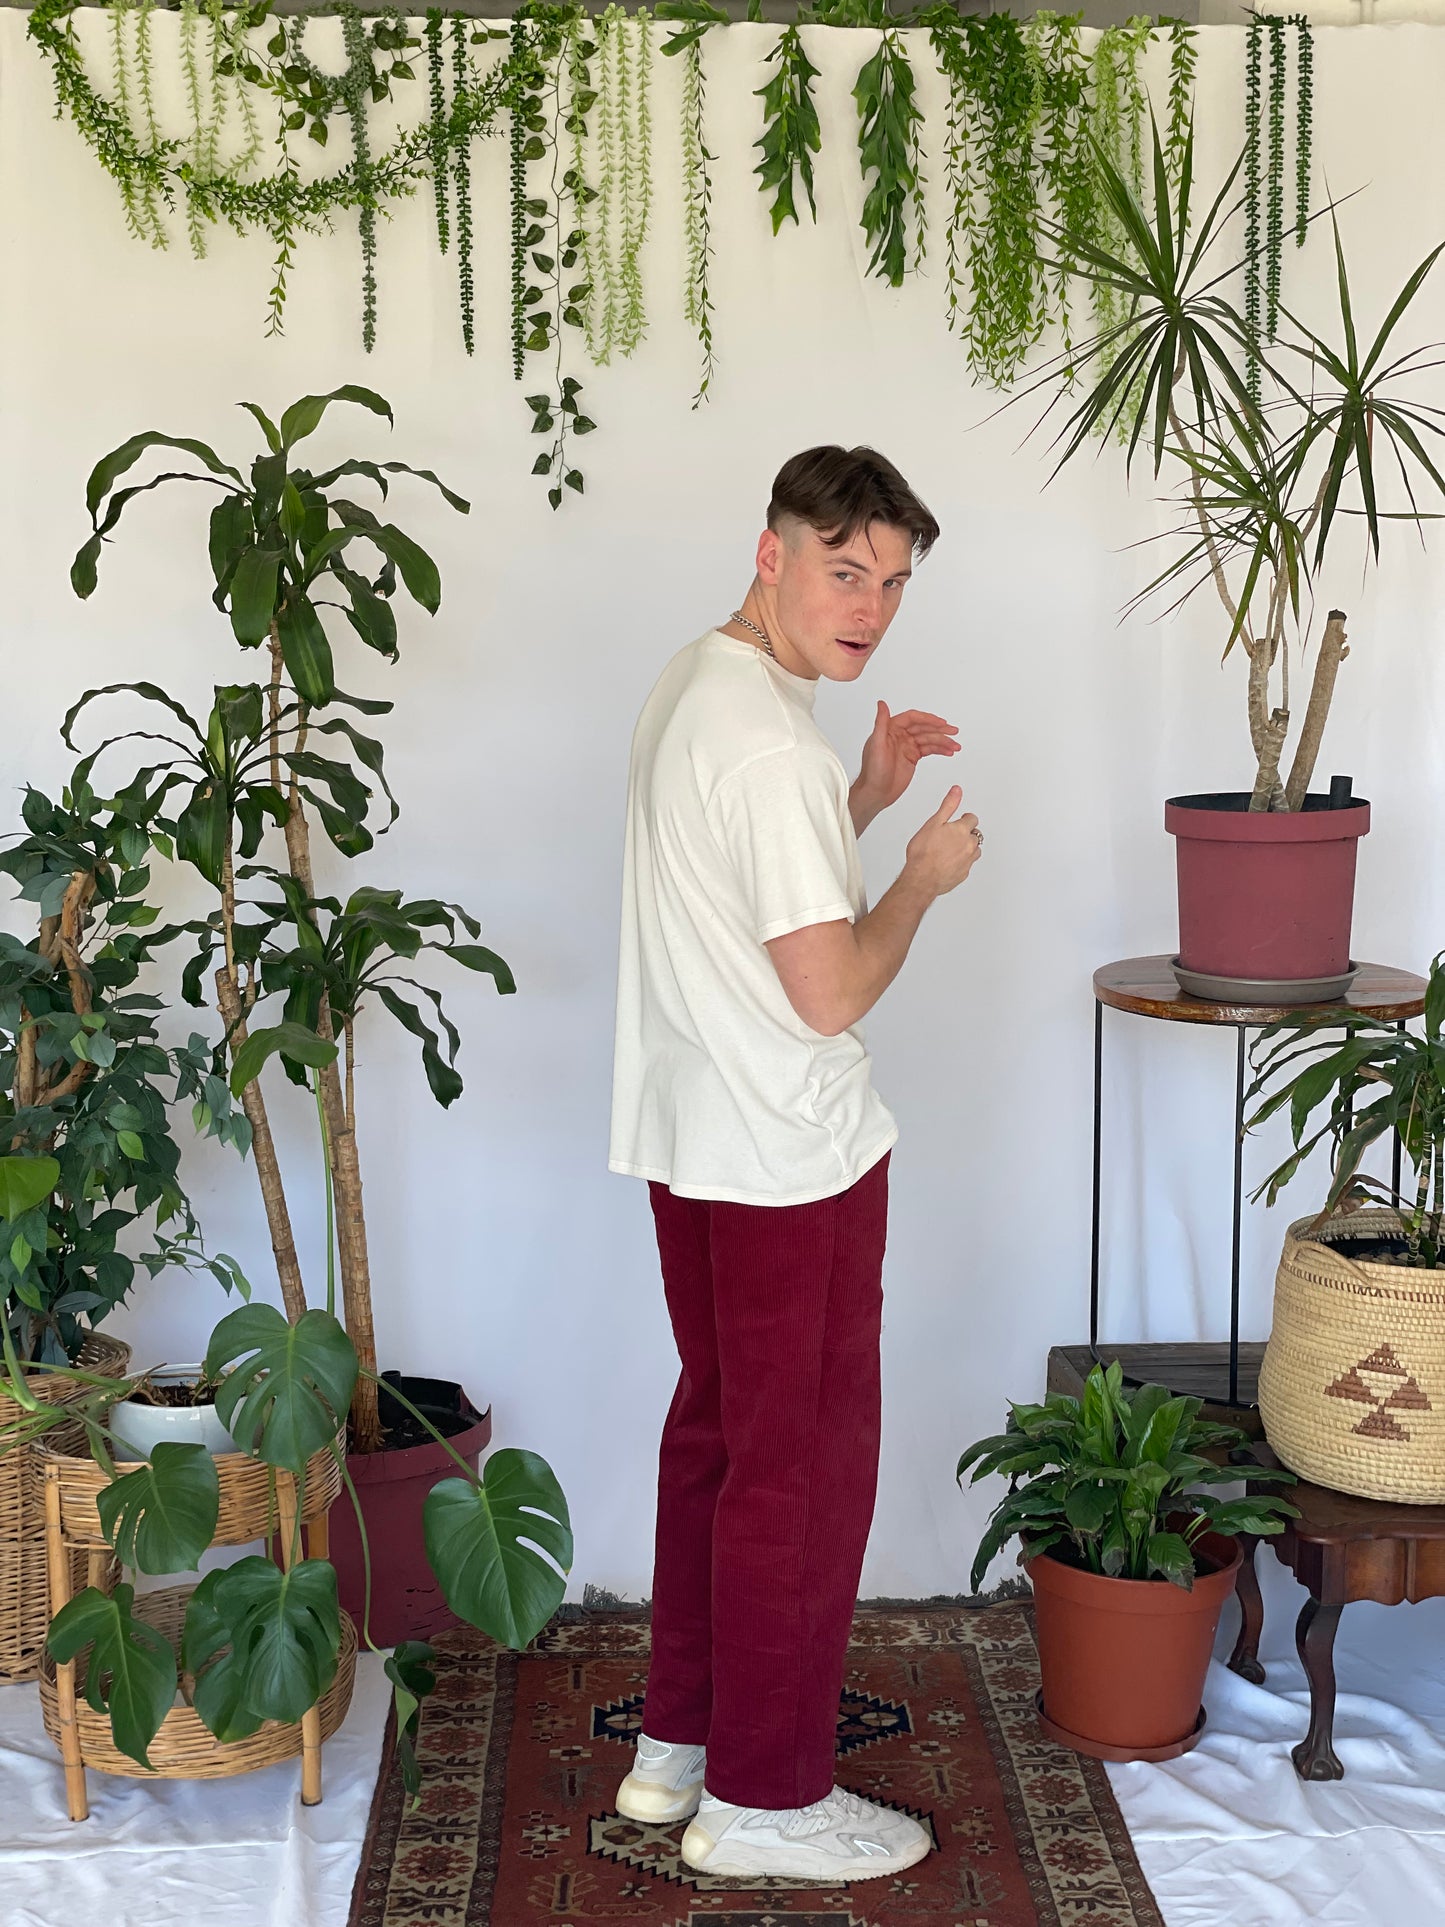 Model wears a cream t-shirt with burgundy corduroy pants and sneakers side on to the camera. The model is standing on a narrow carpet against a white backdrop with plants and hanging foliage.